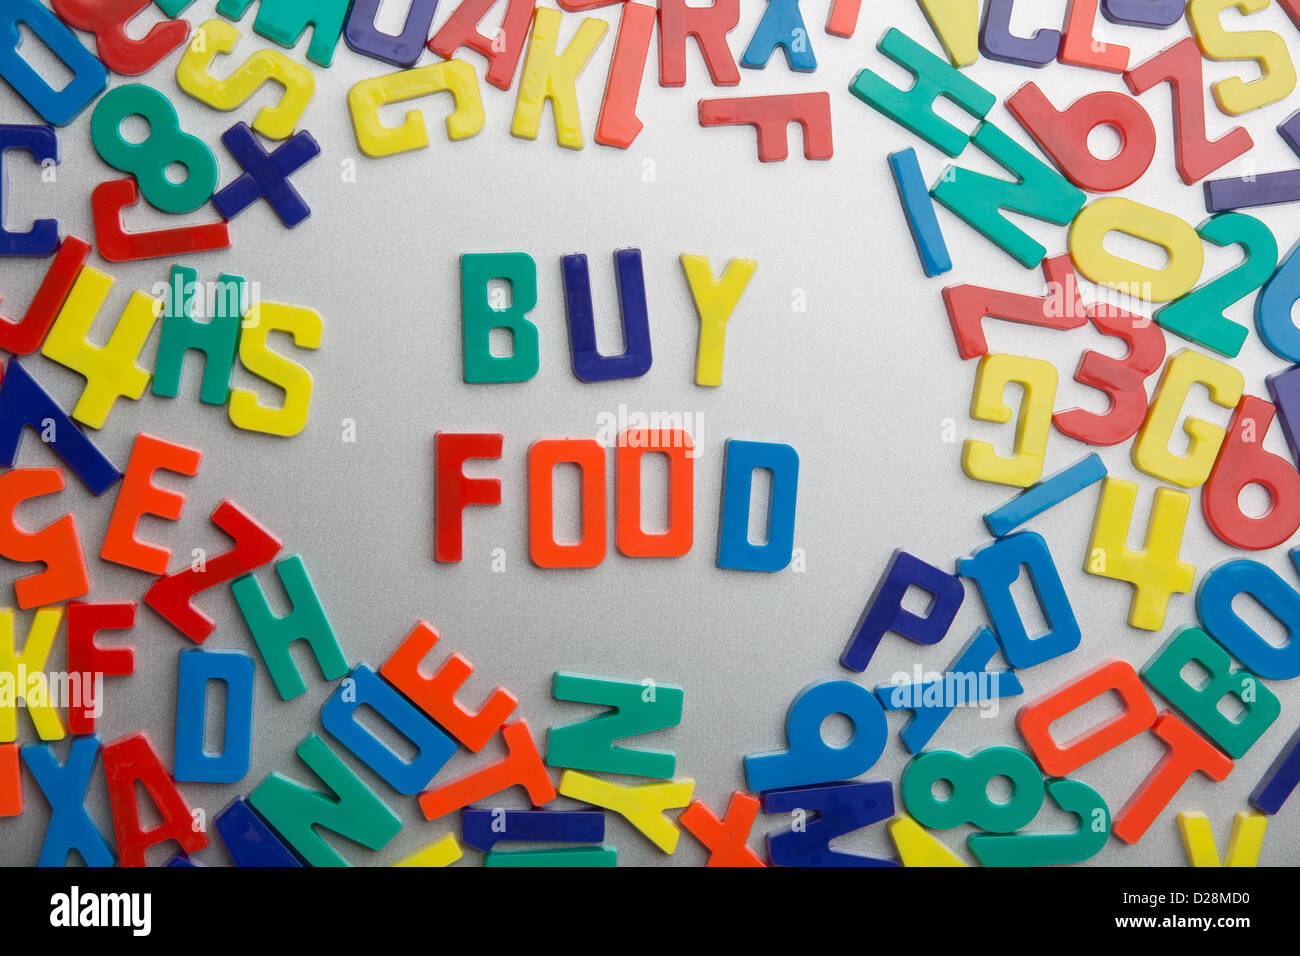 'Buy Food' - Refrigerator magnets spell a message out of a jumble of letters Stock Photo